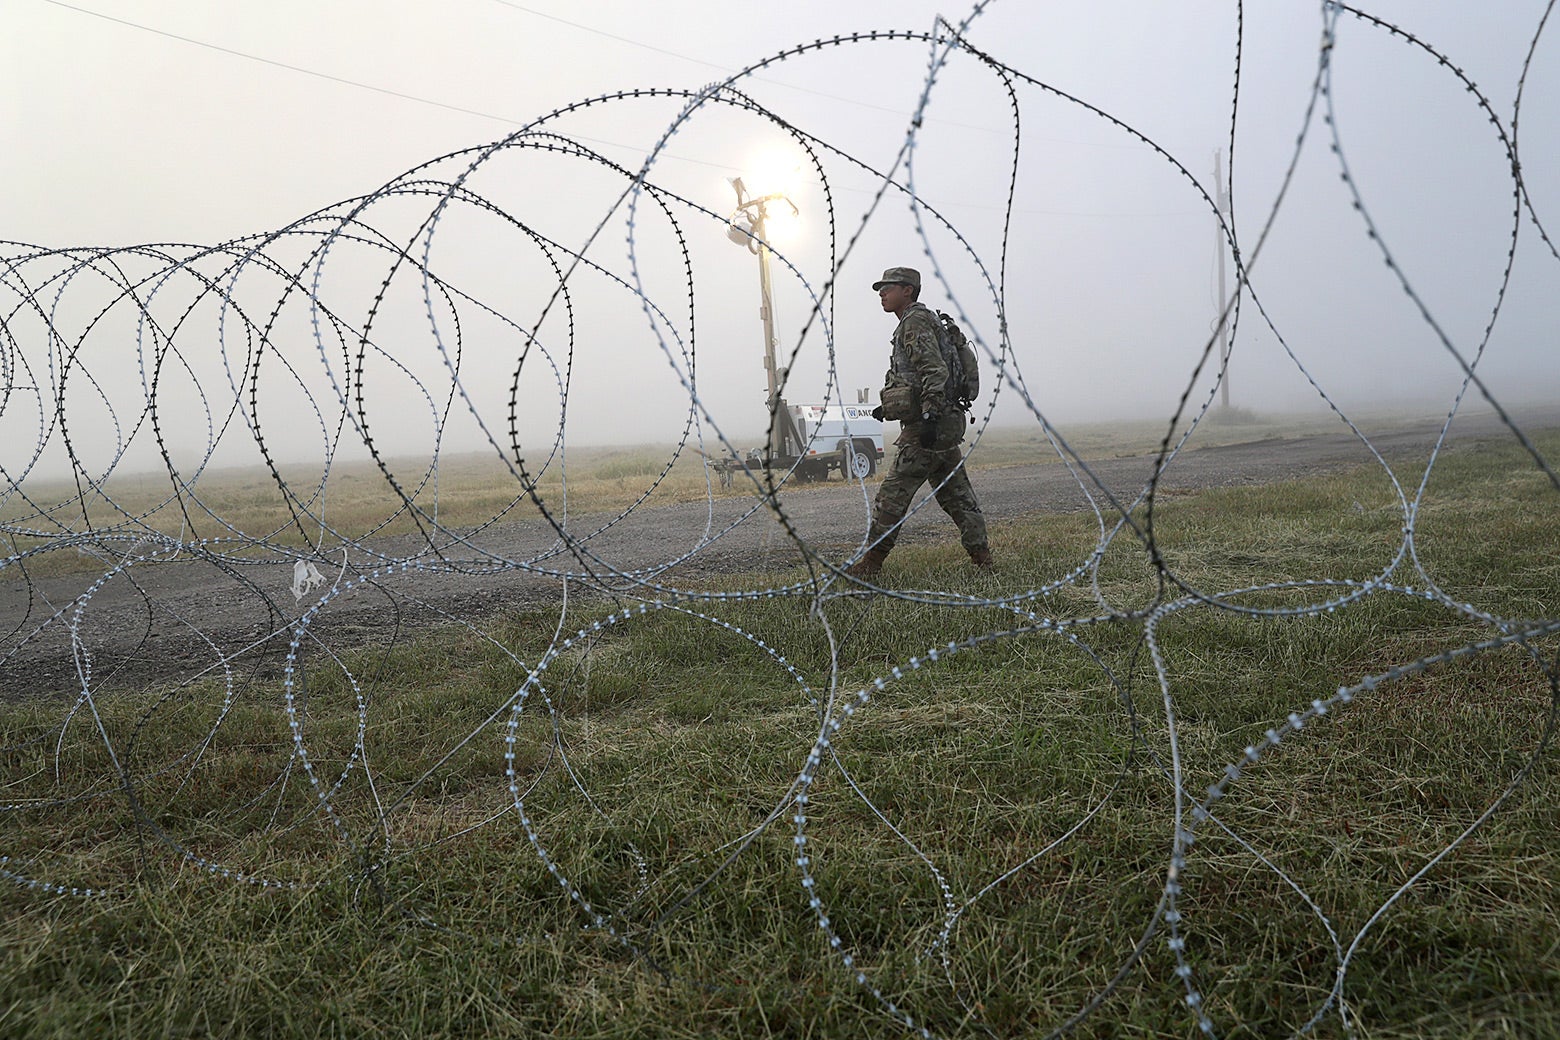 A soldier walking beside a barbed wire fence.